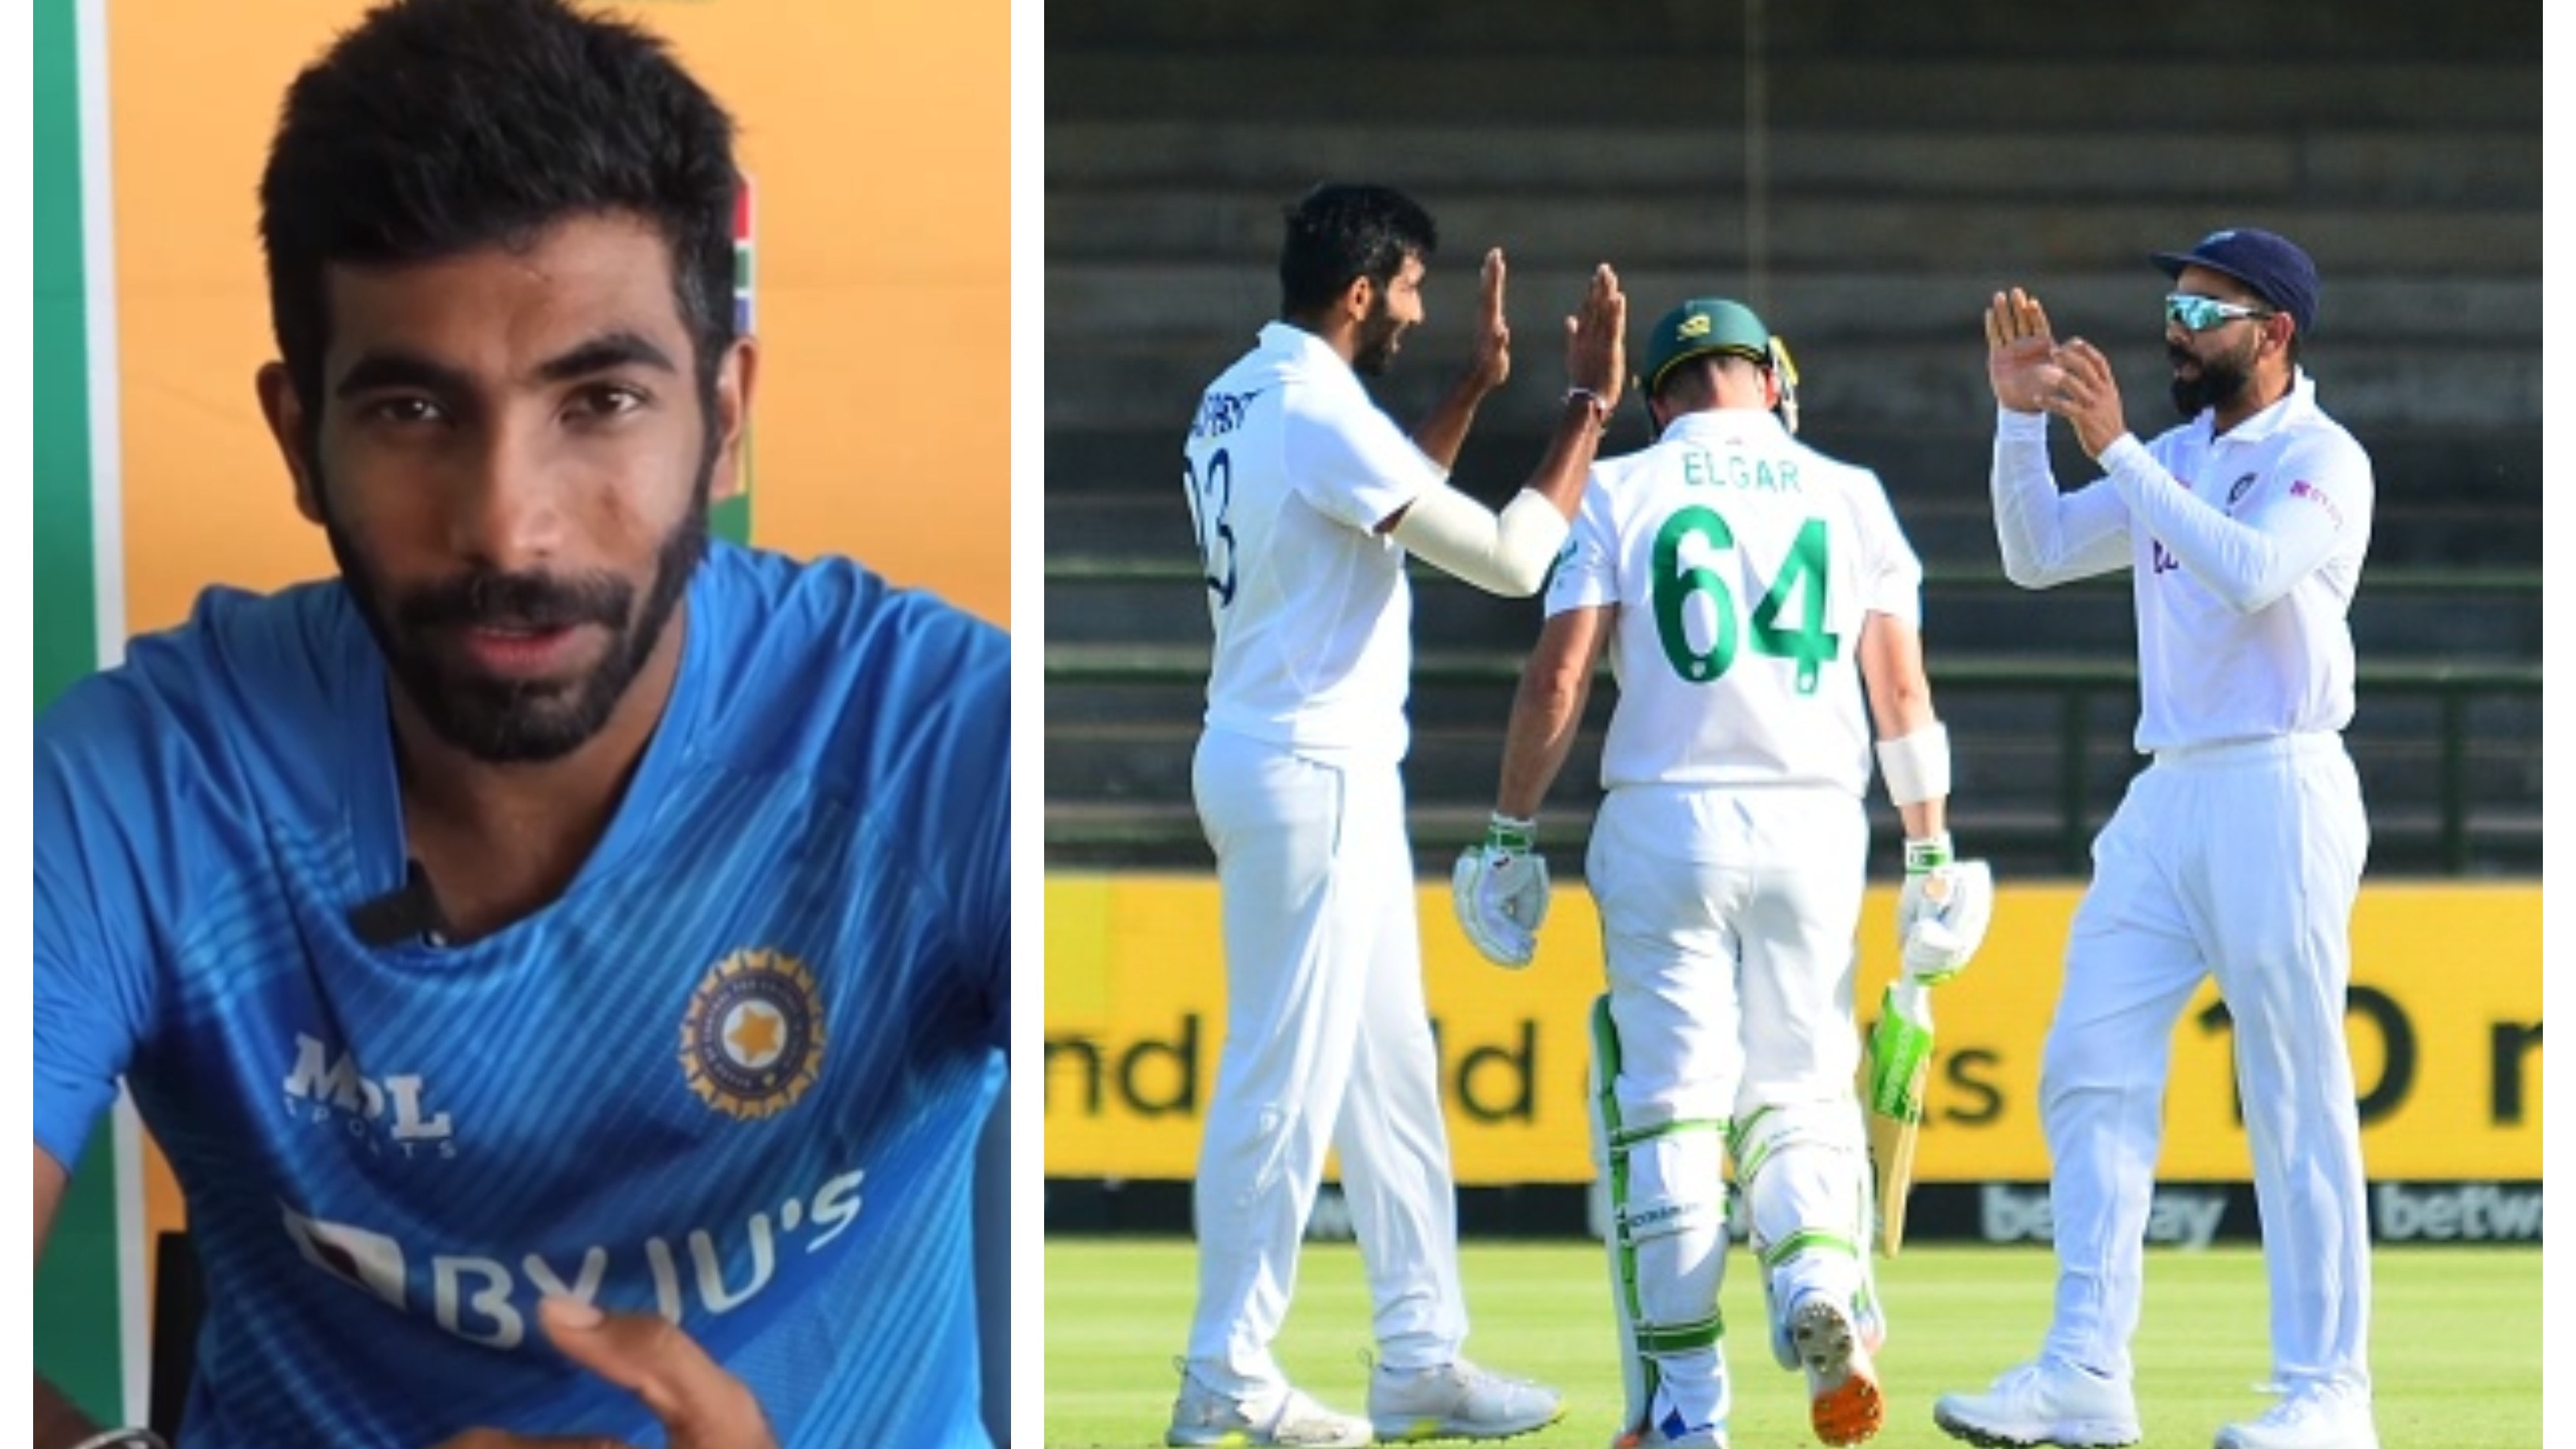 SA v IND 2021-22: ‘Virat Kohli brings a lot of energy, always good to play under him’, says Bumrah after 5-fer in 3rd Test